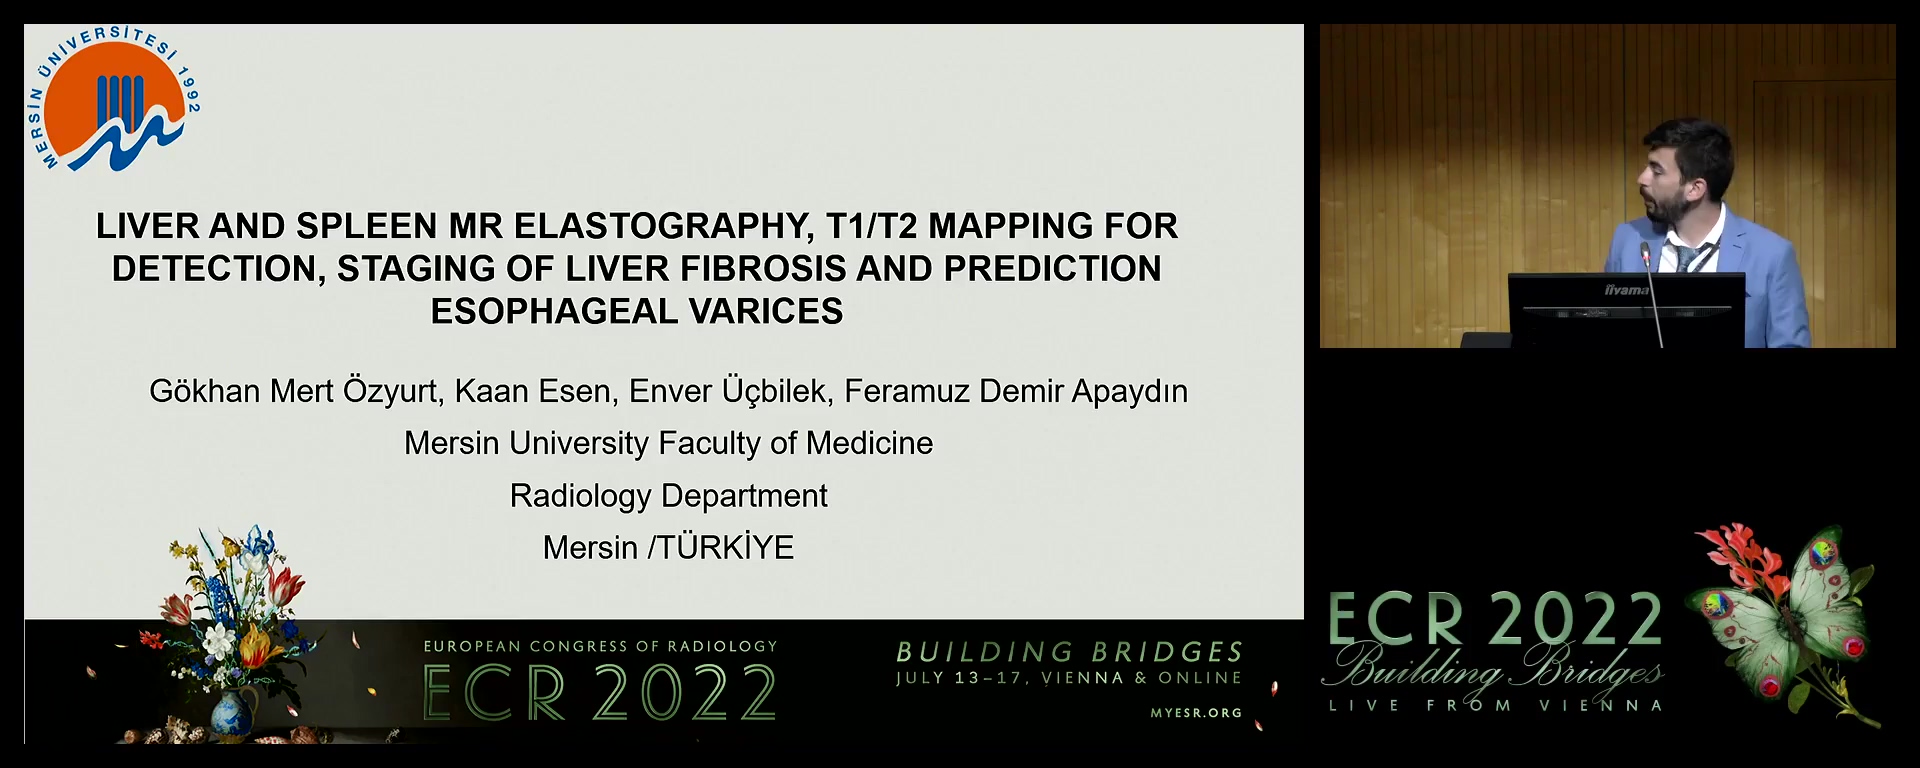 Liver and spleen MR elastography, T1/T2 mapping for detection-staging of liver fibrosis and prediction of oesophageal varices - Gökhan Mert Özyurt, Yenisehir mersin / TR